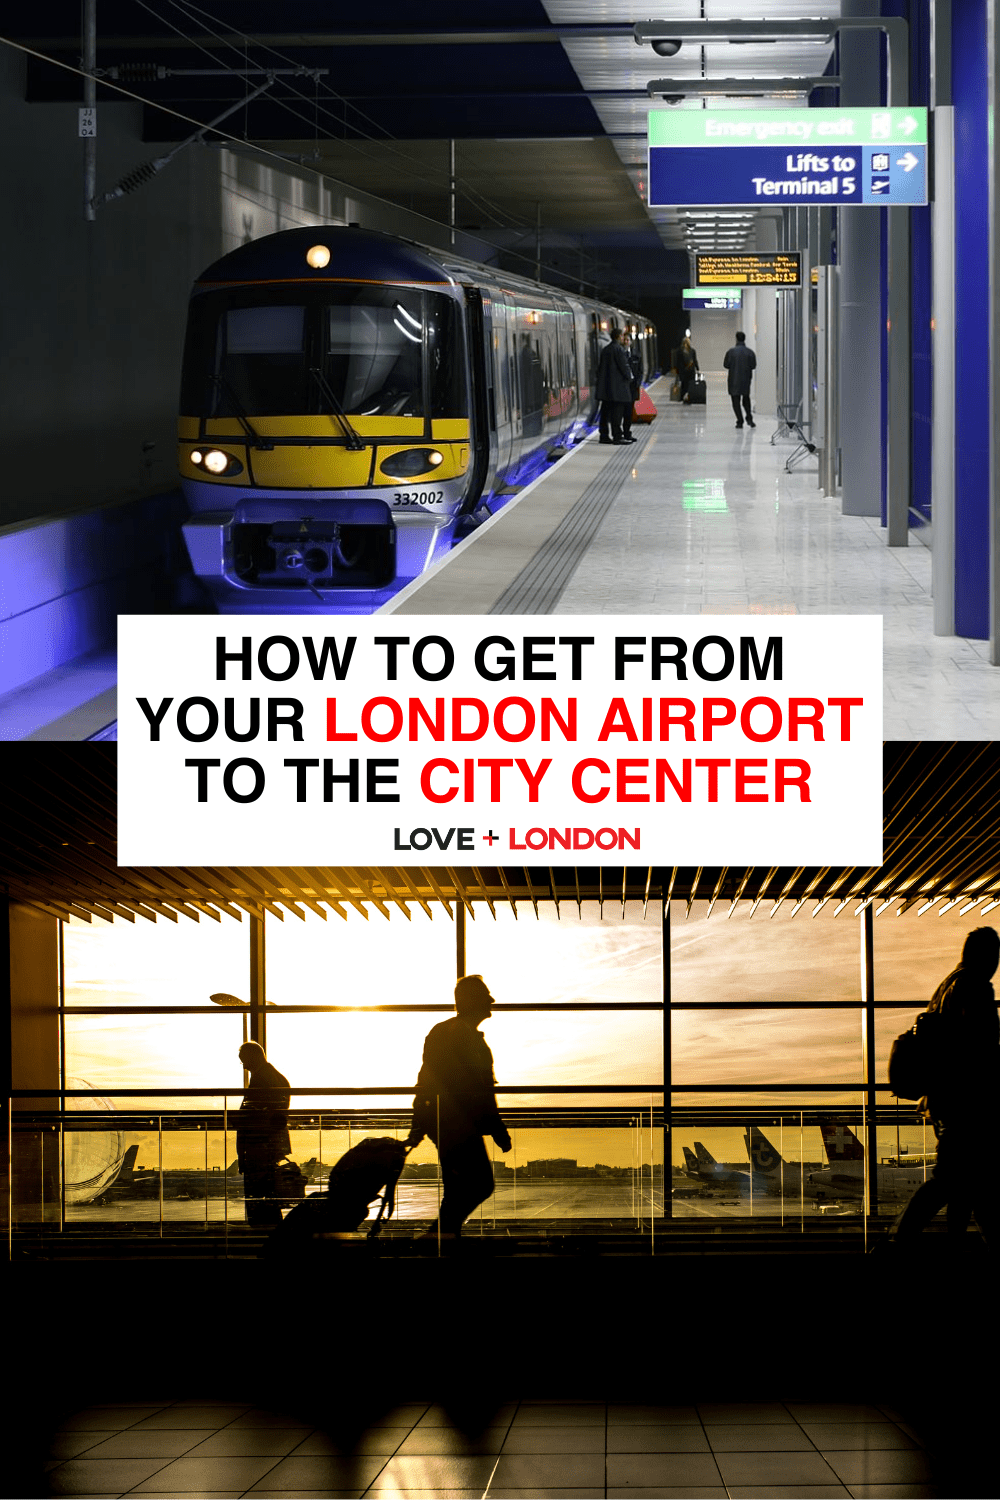 How to get from your London Airport to the City Center